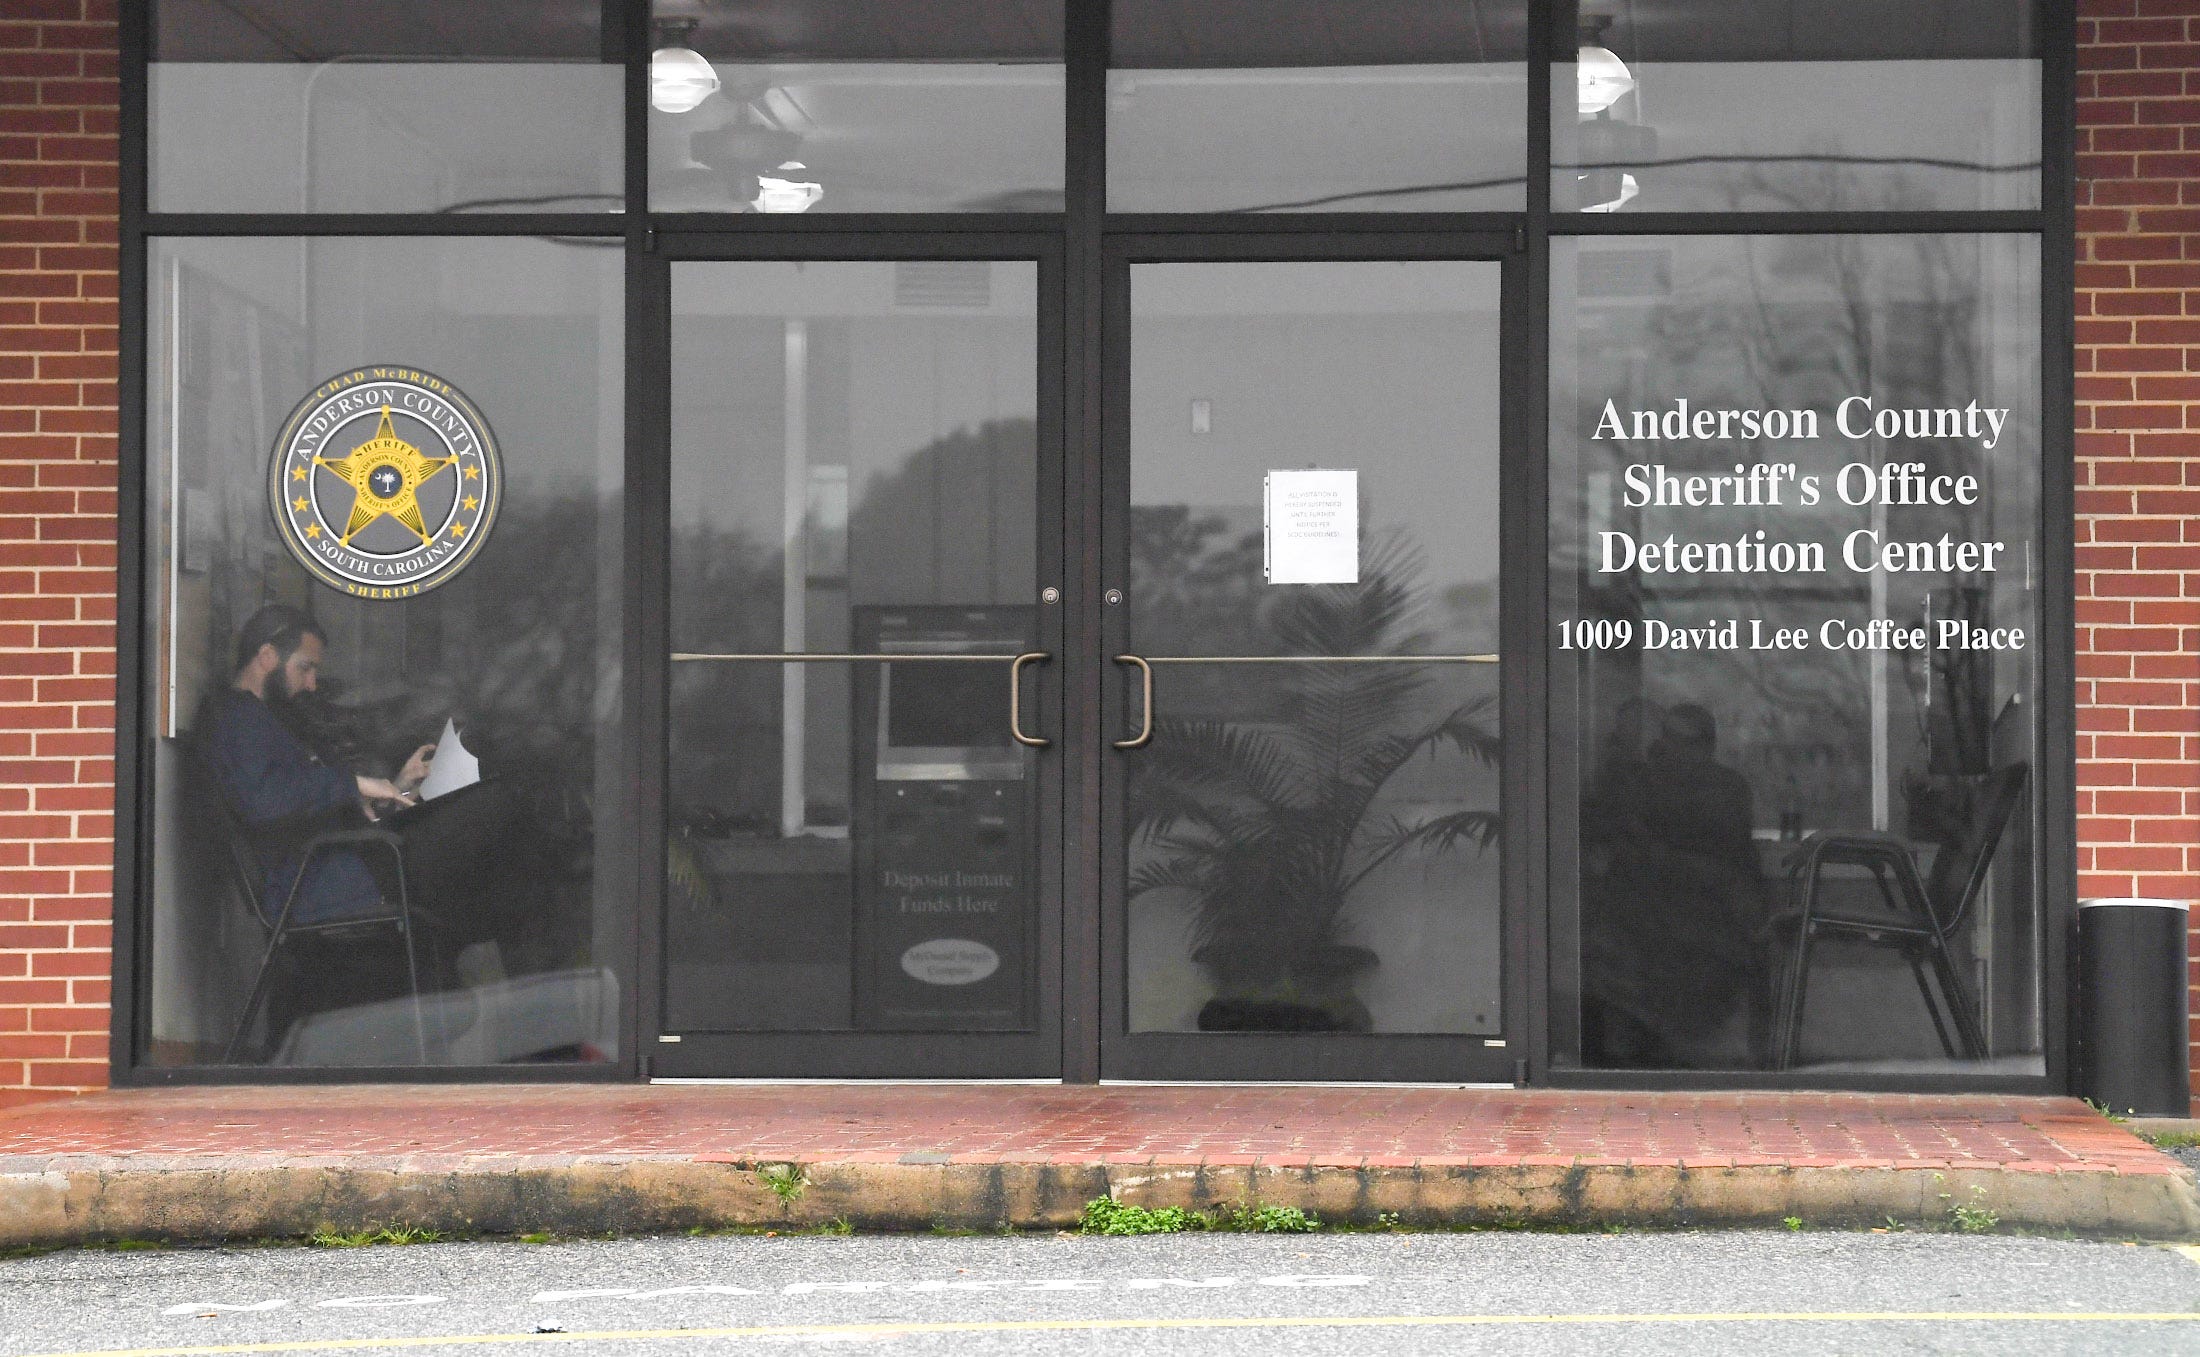 Image of Anderson County Sheriff and Detention Center